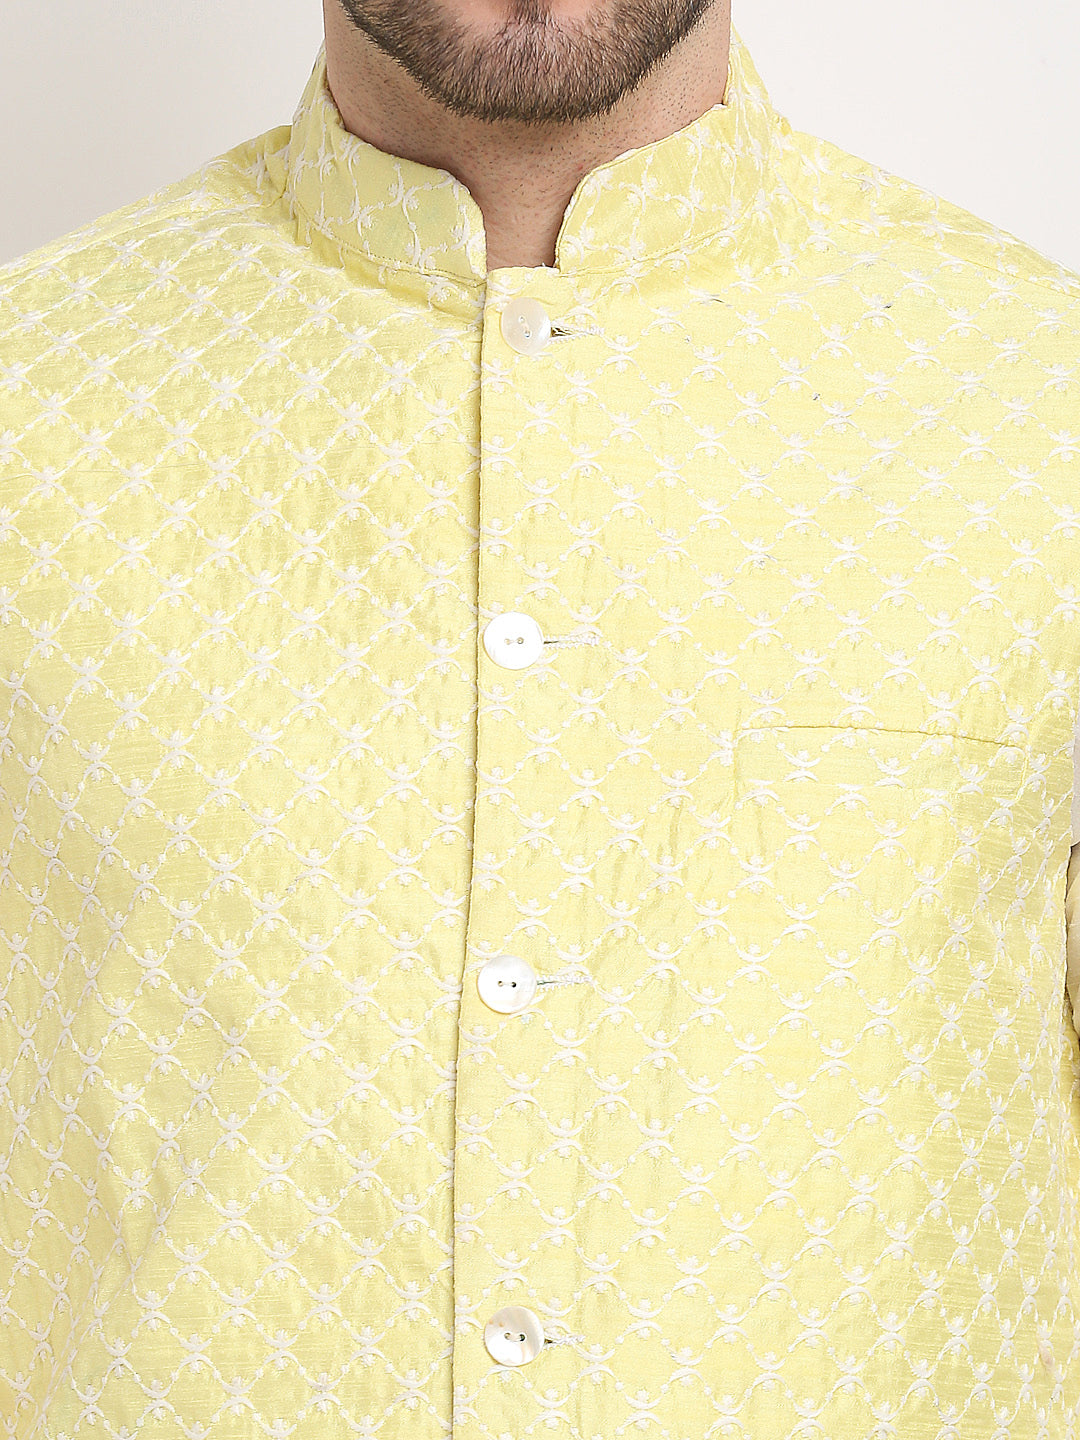 Jompers Men's Yellow Yellow and White Embroidered Nehru Jacket